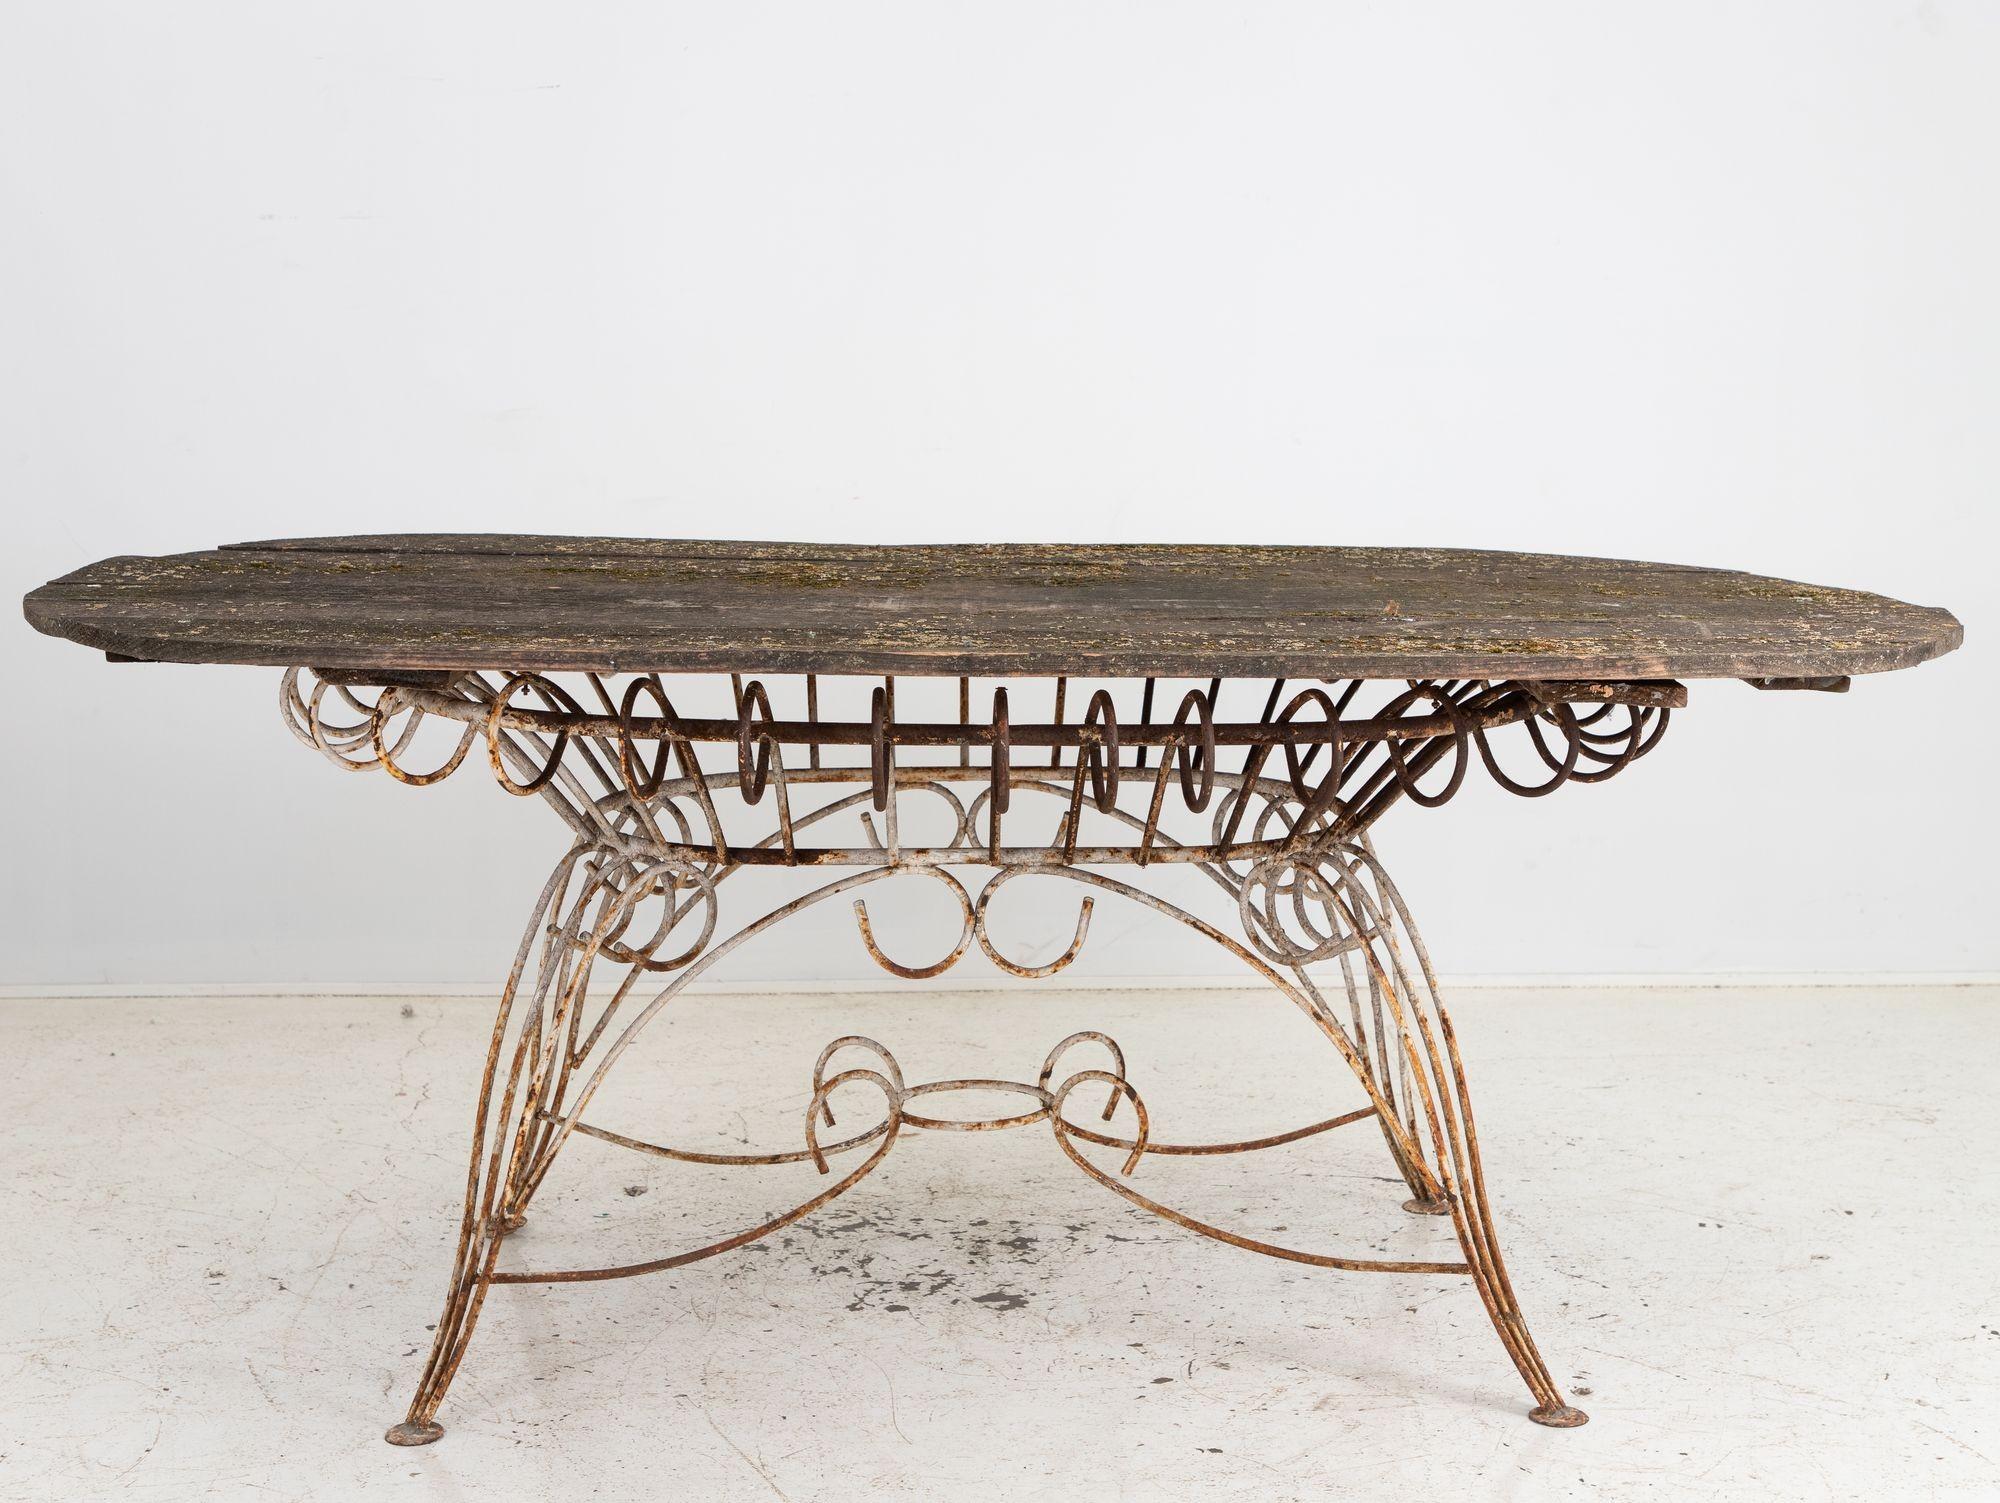 This early 20th Century French oval dining has a later wooden top as a testament to craftsmanship, weathered yet resilient. Beneath, an intricate scrolling iron base, reminiscent of Art Nouveau intricacies, adding an ethereal charm. Each curve and